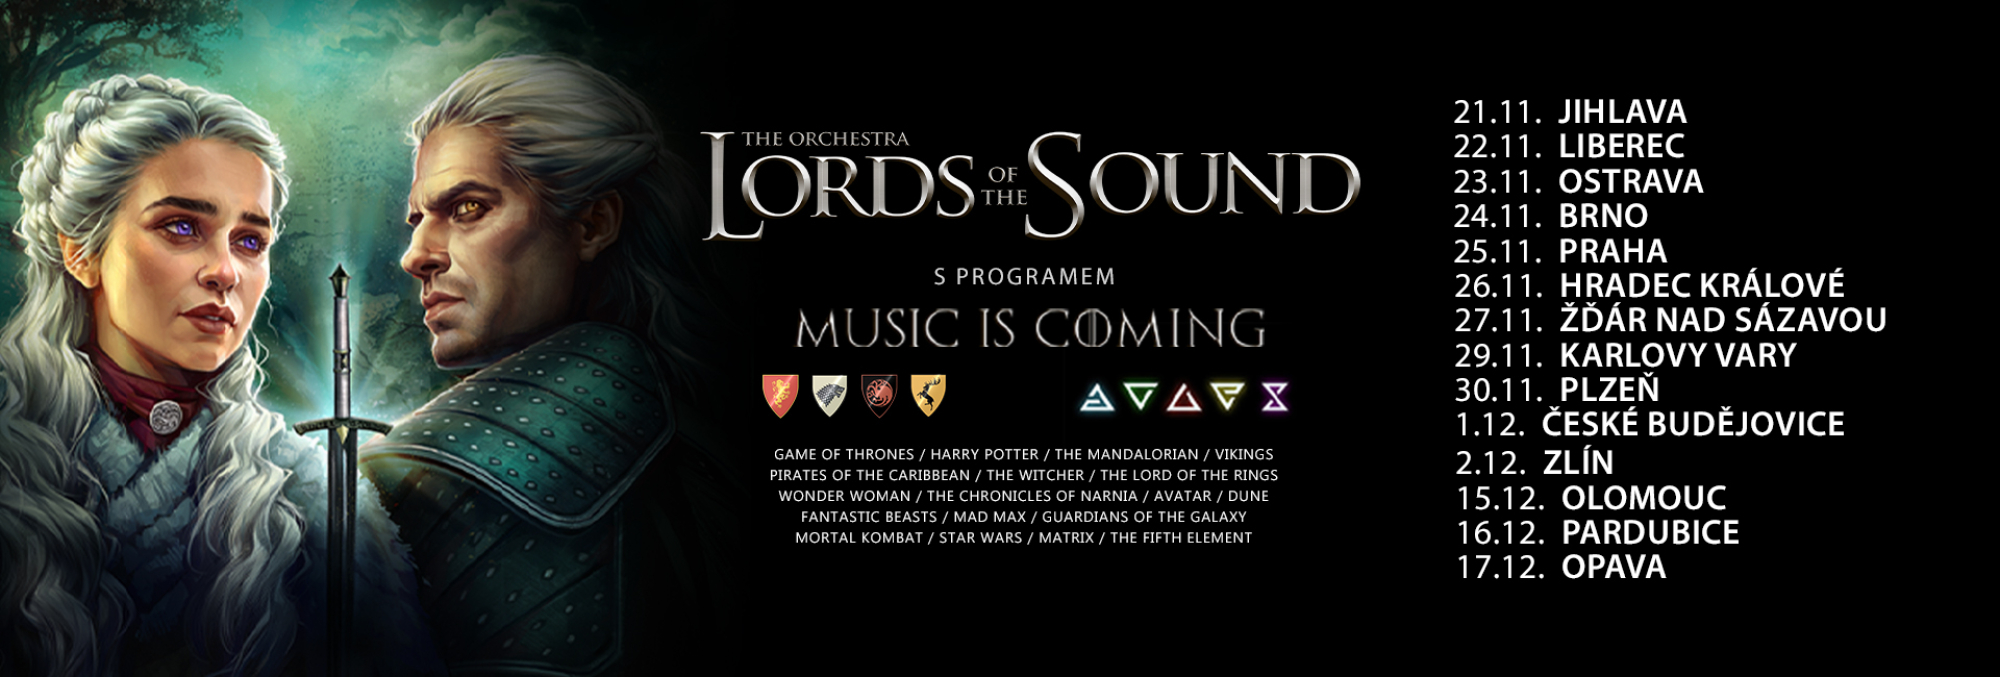 LORDS OF THE SOUND "Music is coming"